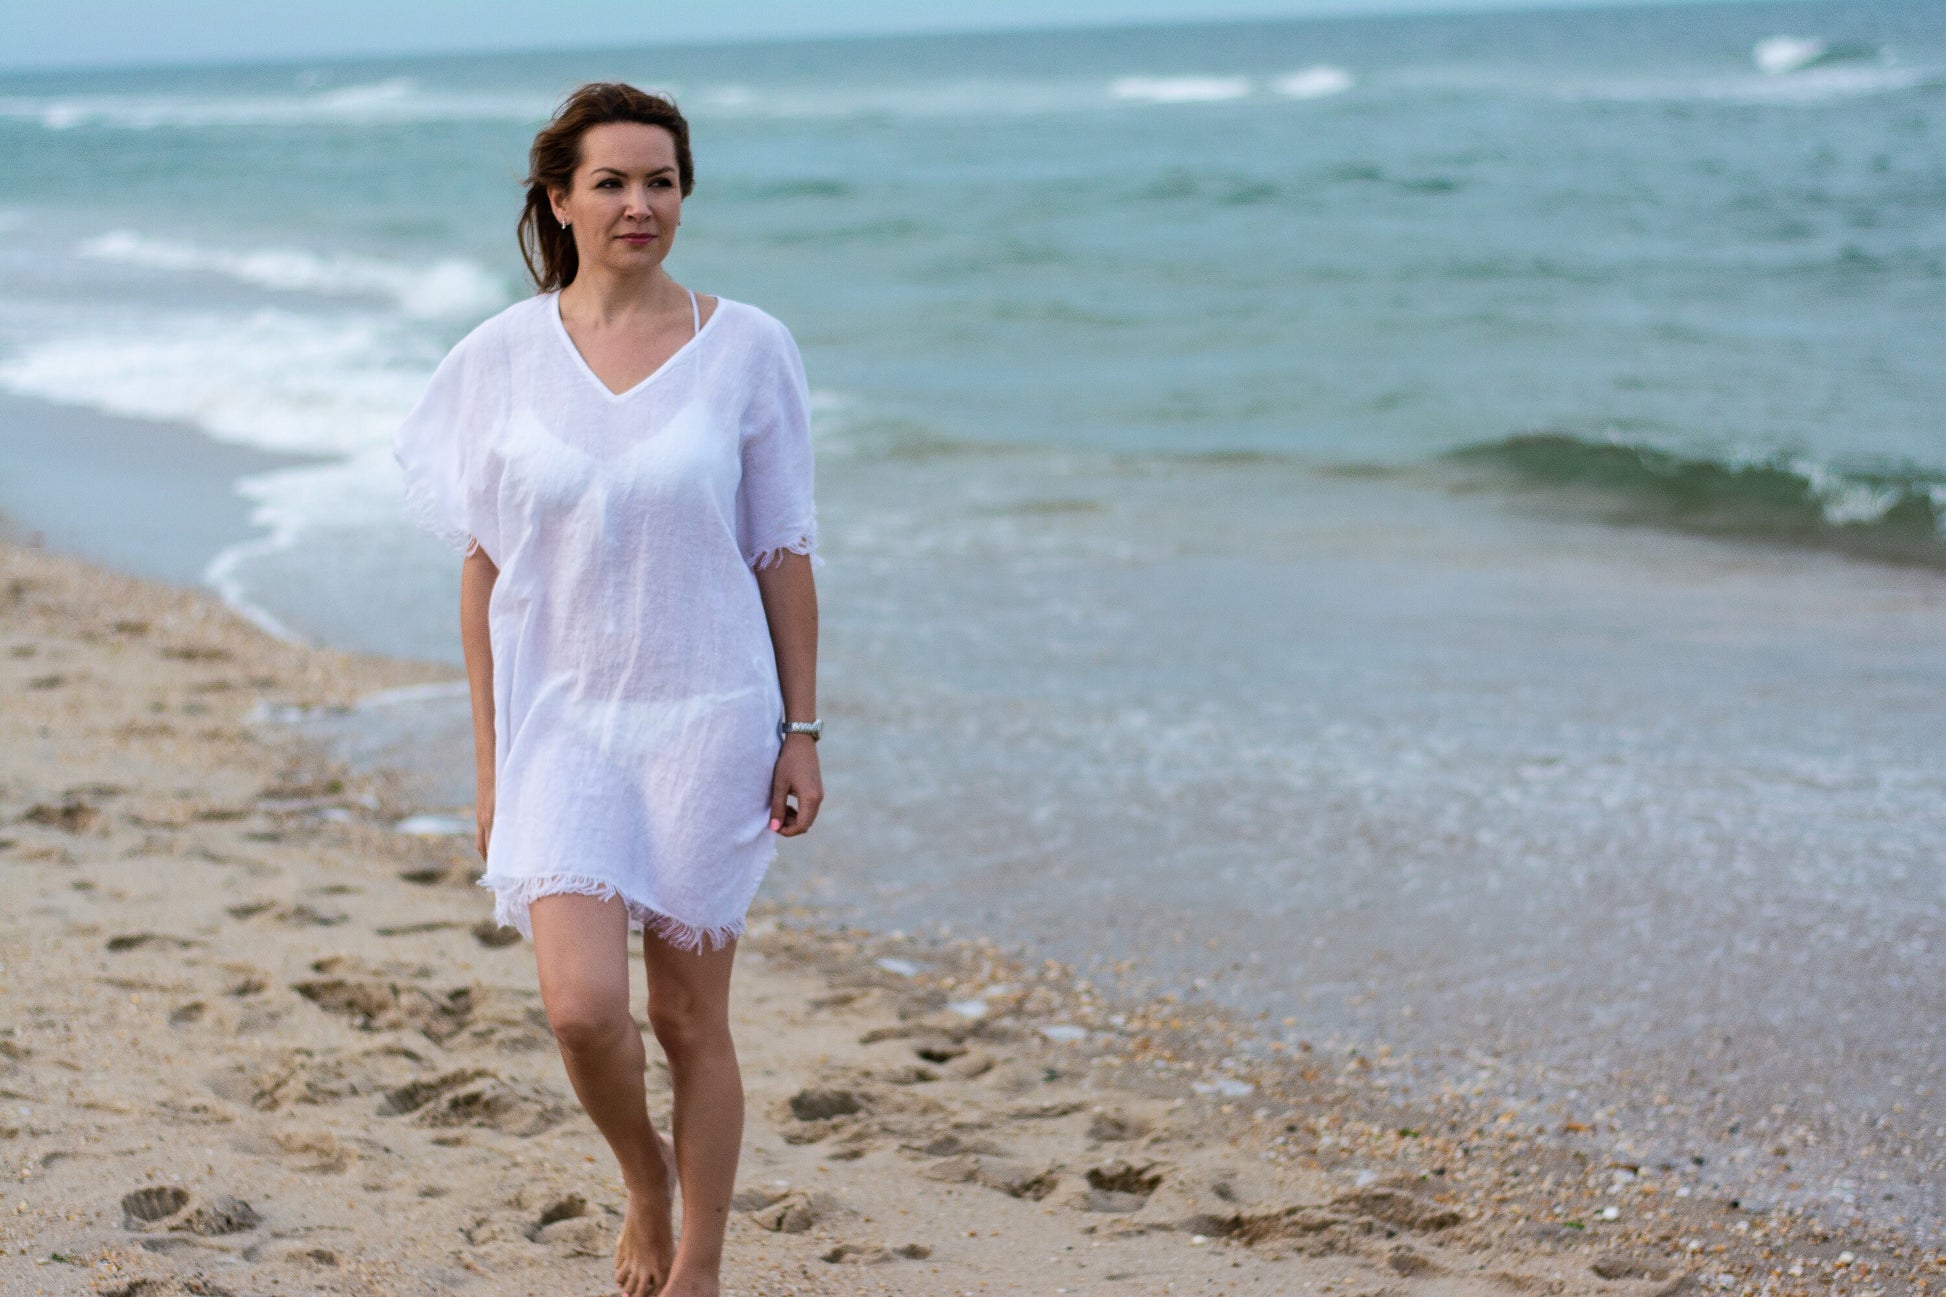 The natural charm of a white linen beach shirt with lovely wrinkles.